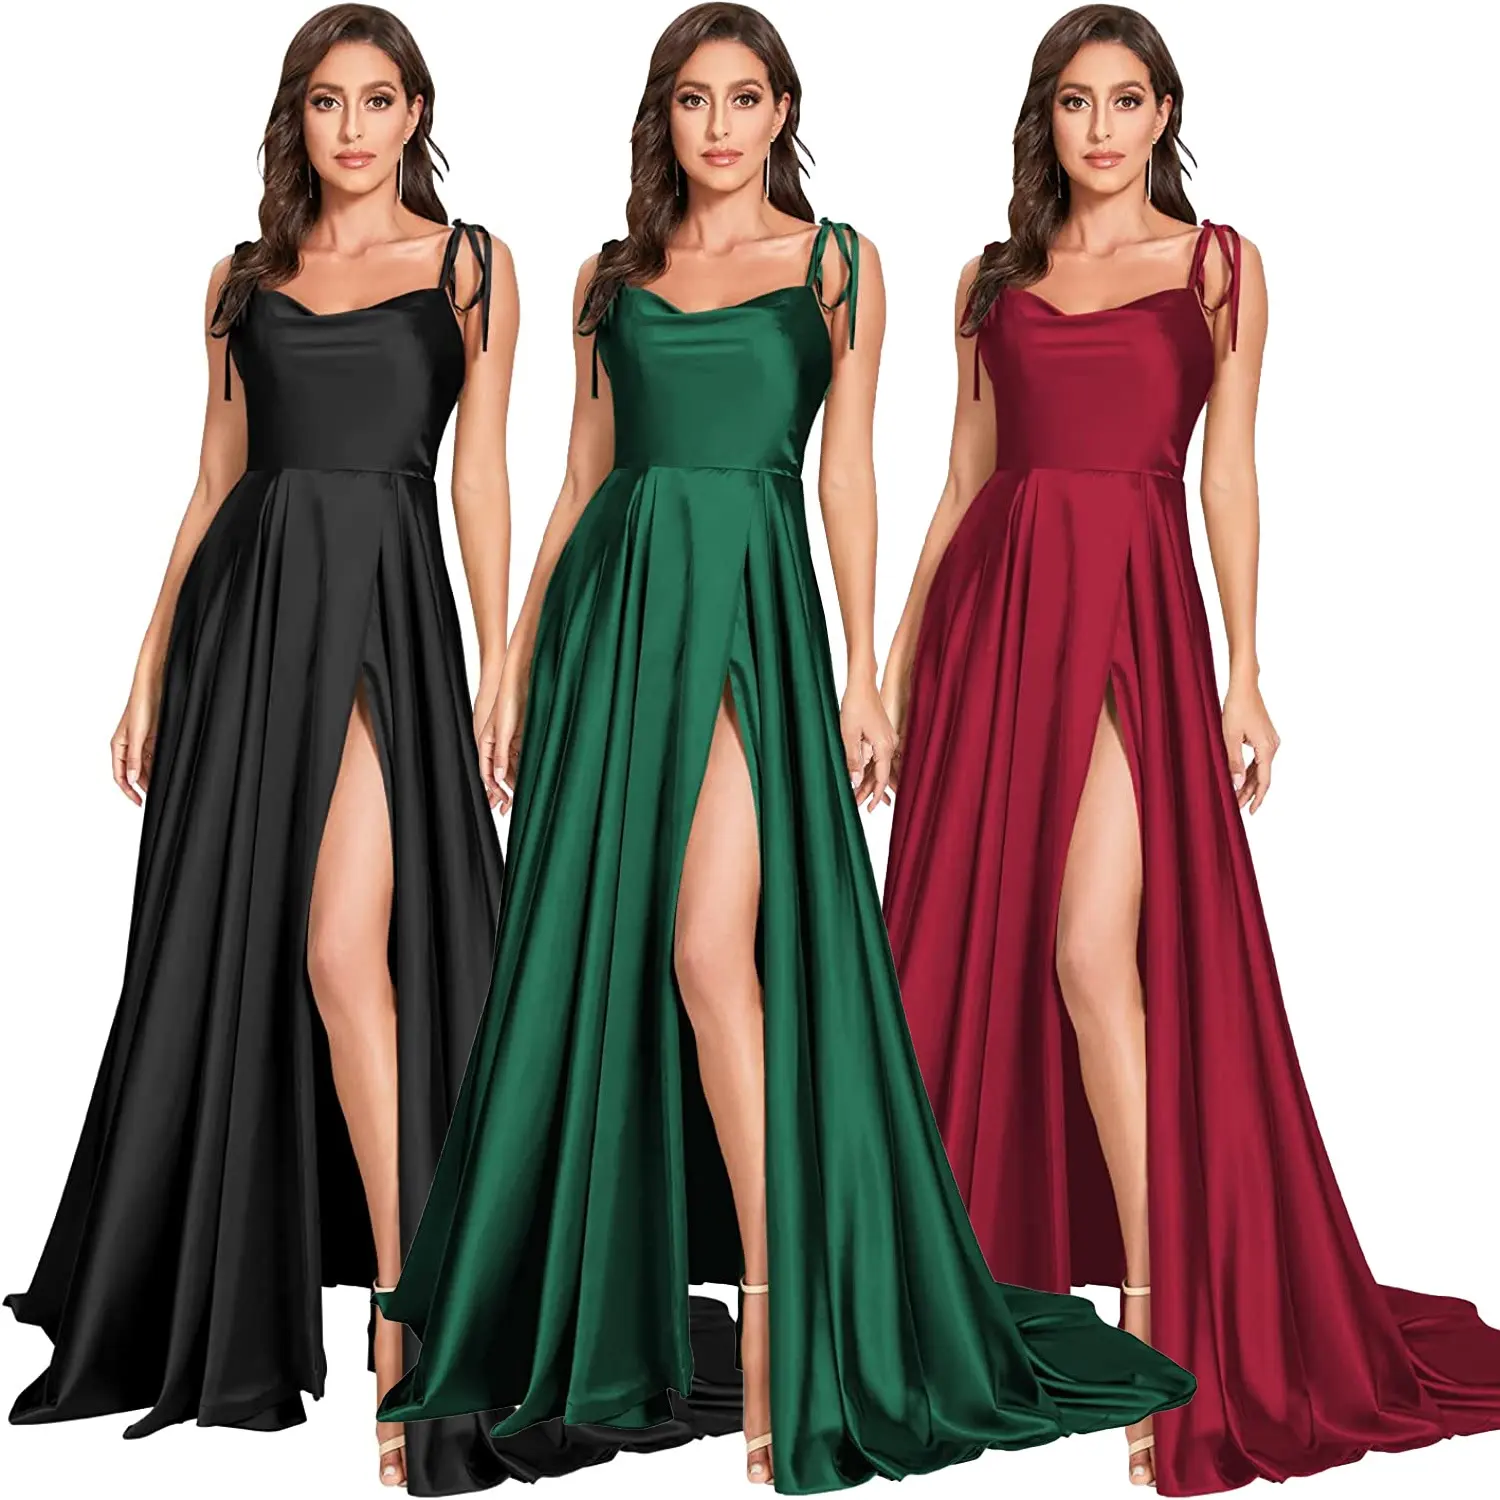 Plus Size Women Dinner Formal Evening Prom Gown Cocktail Long Maxi Satin Sexy Elegant Casual Party Dresses For Fat Lady